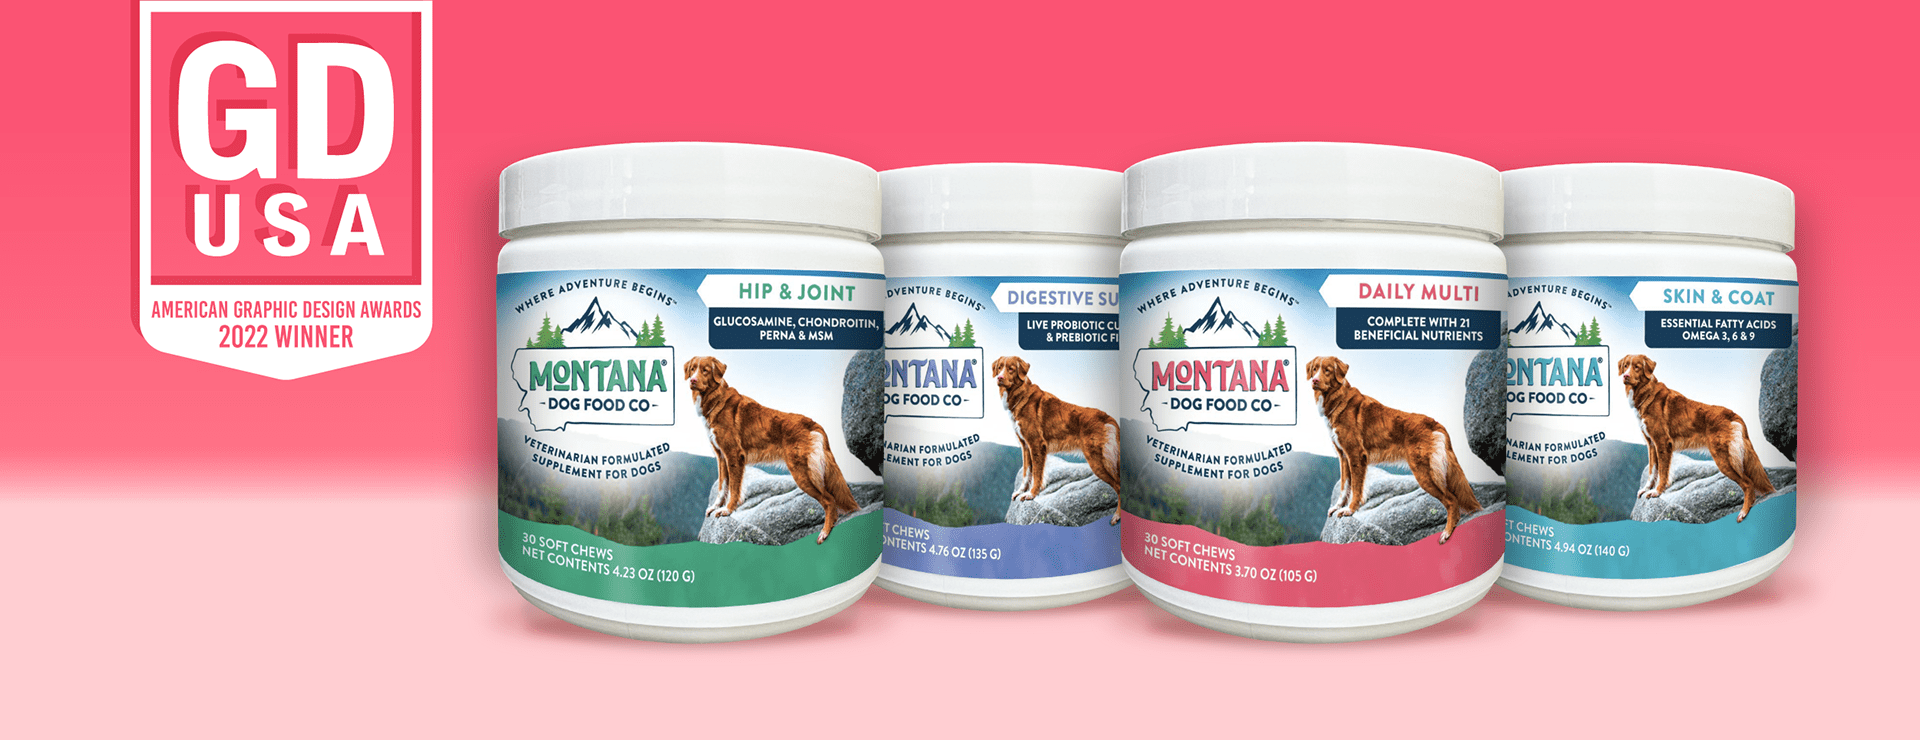 Matrix Partners GD USA American Graphic Awards 2022 Winner: Montana Dog Food Co. Veterinarian Formulated Supplement for Dogs